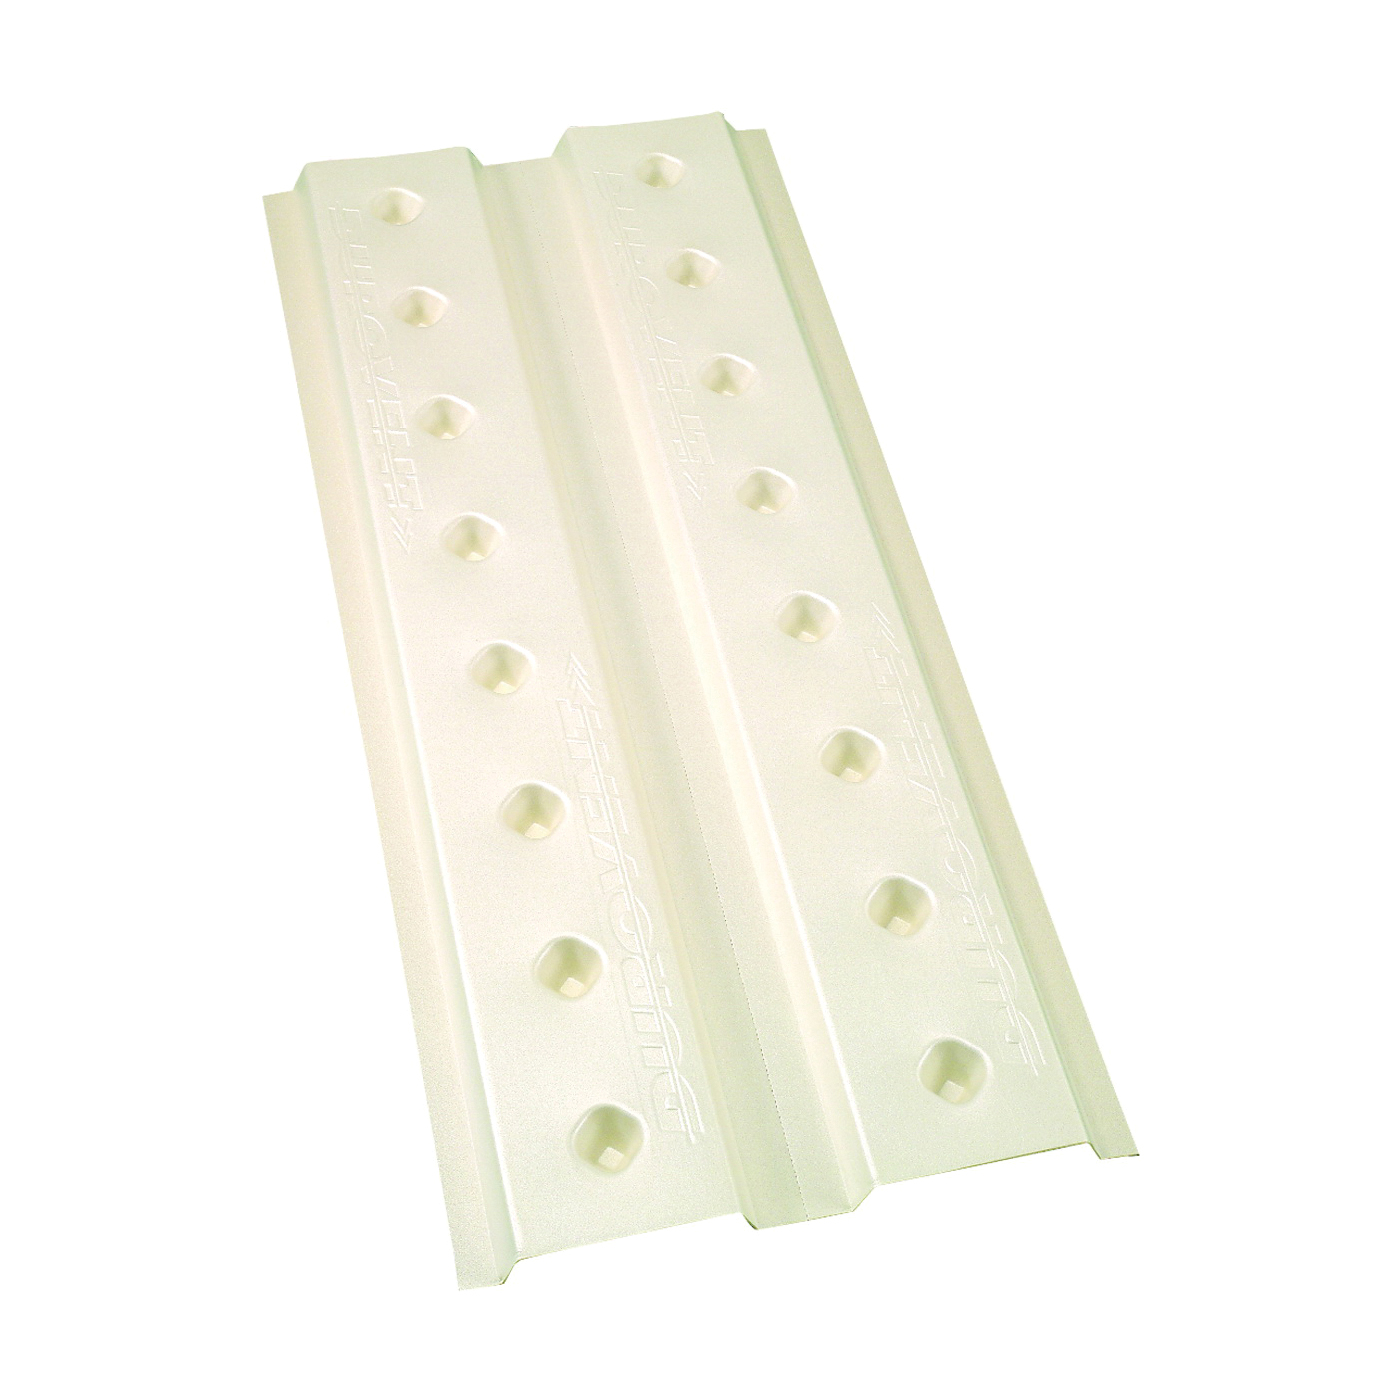 UDV2248 Rafter Vent, 48 in L, 22 in W, Polystyrene